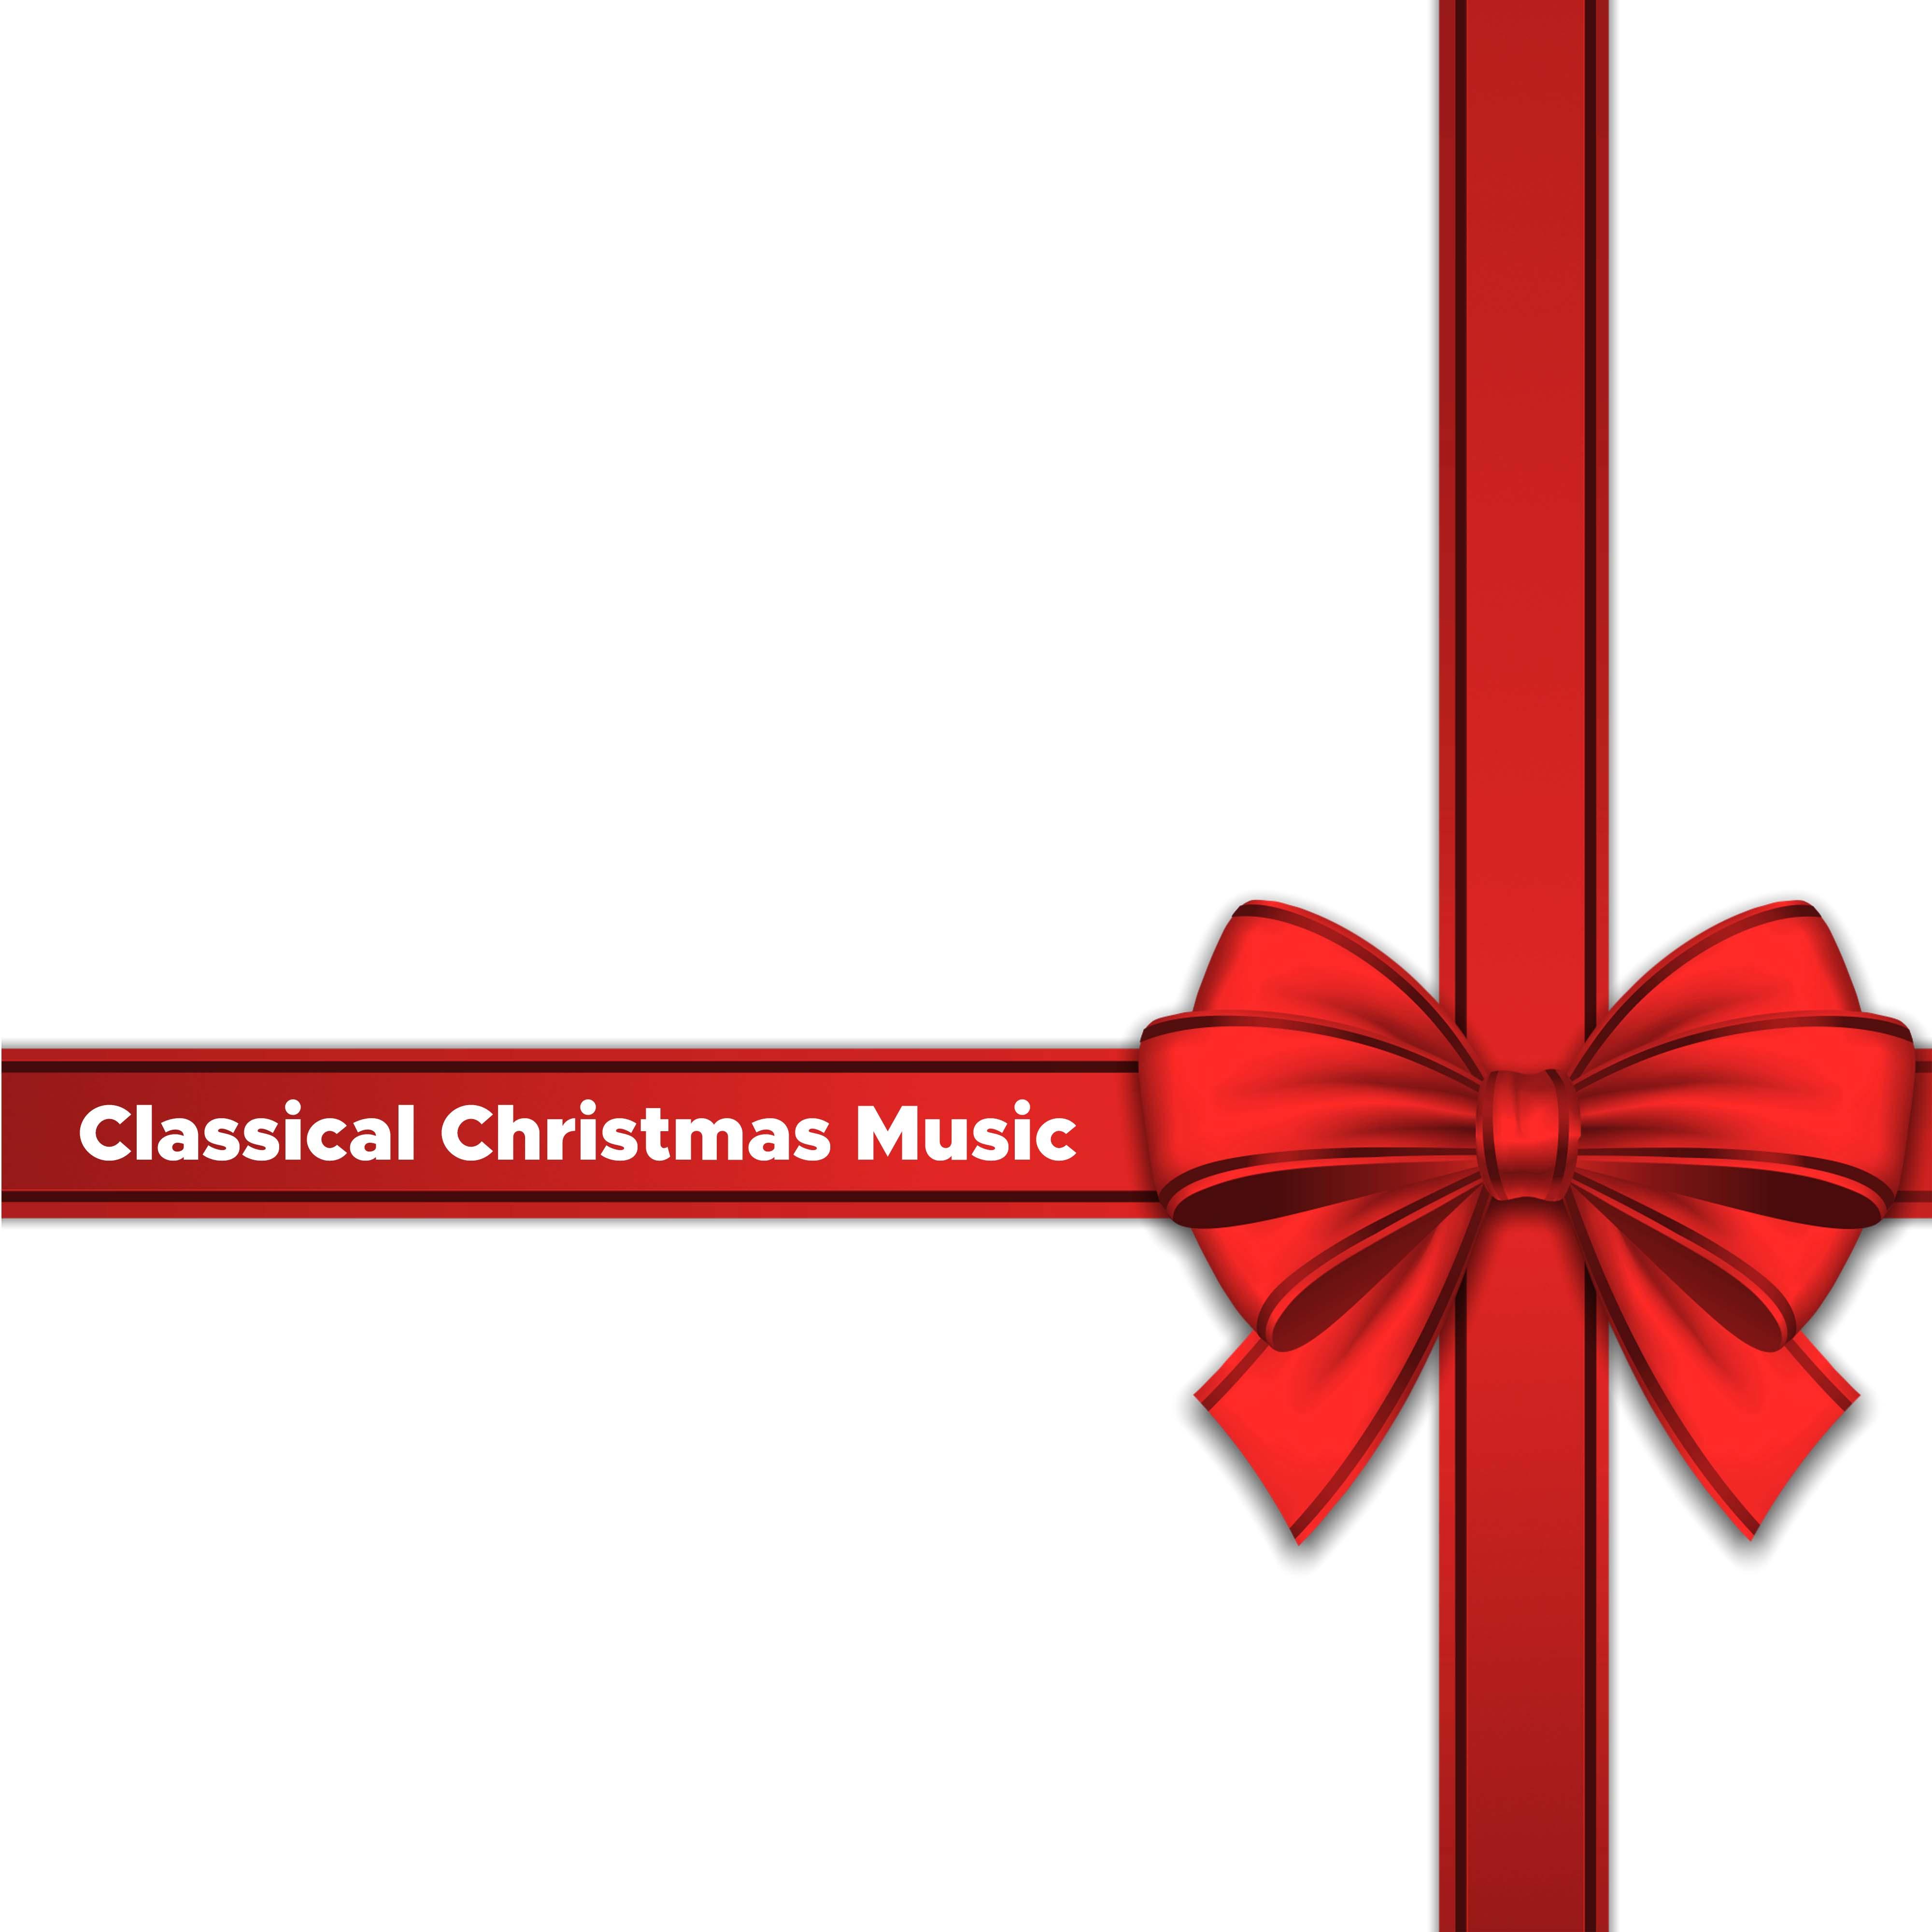 Classical Christmas Music: Your Favorite Christmas Songs mixed with Christmas Piano Music